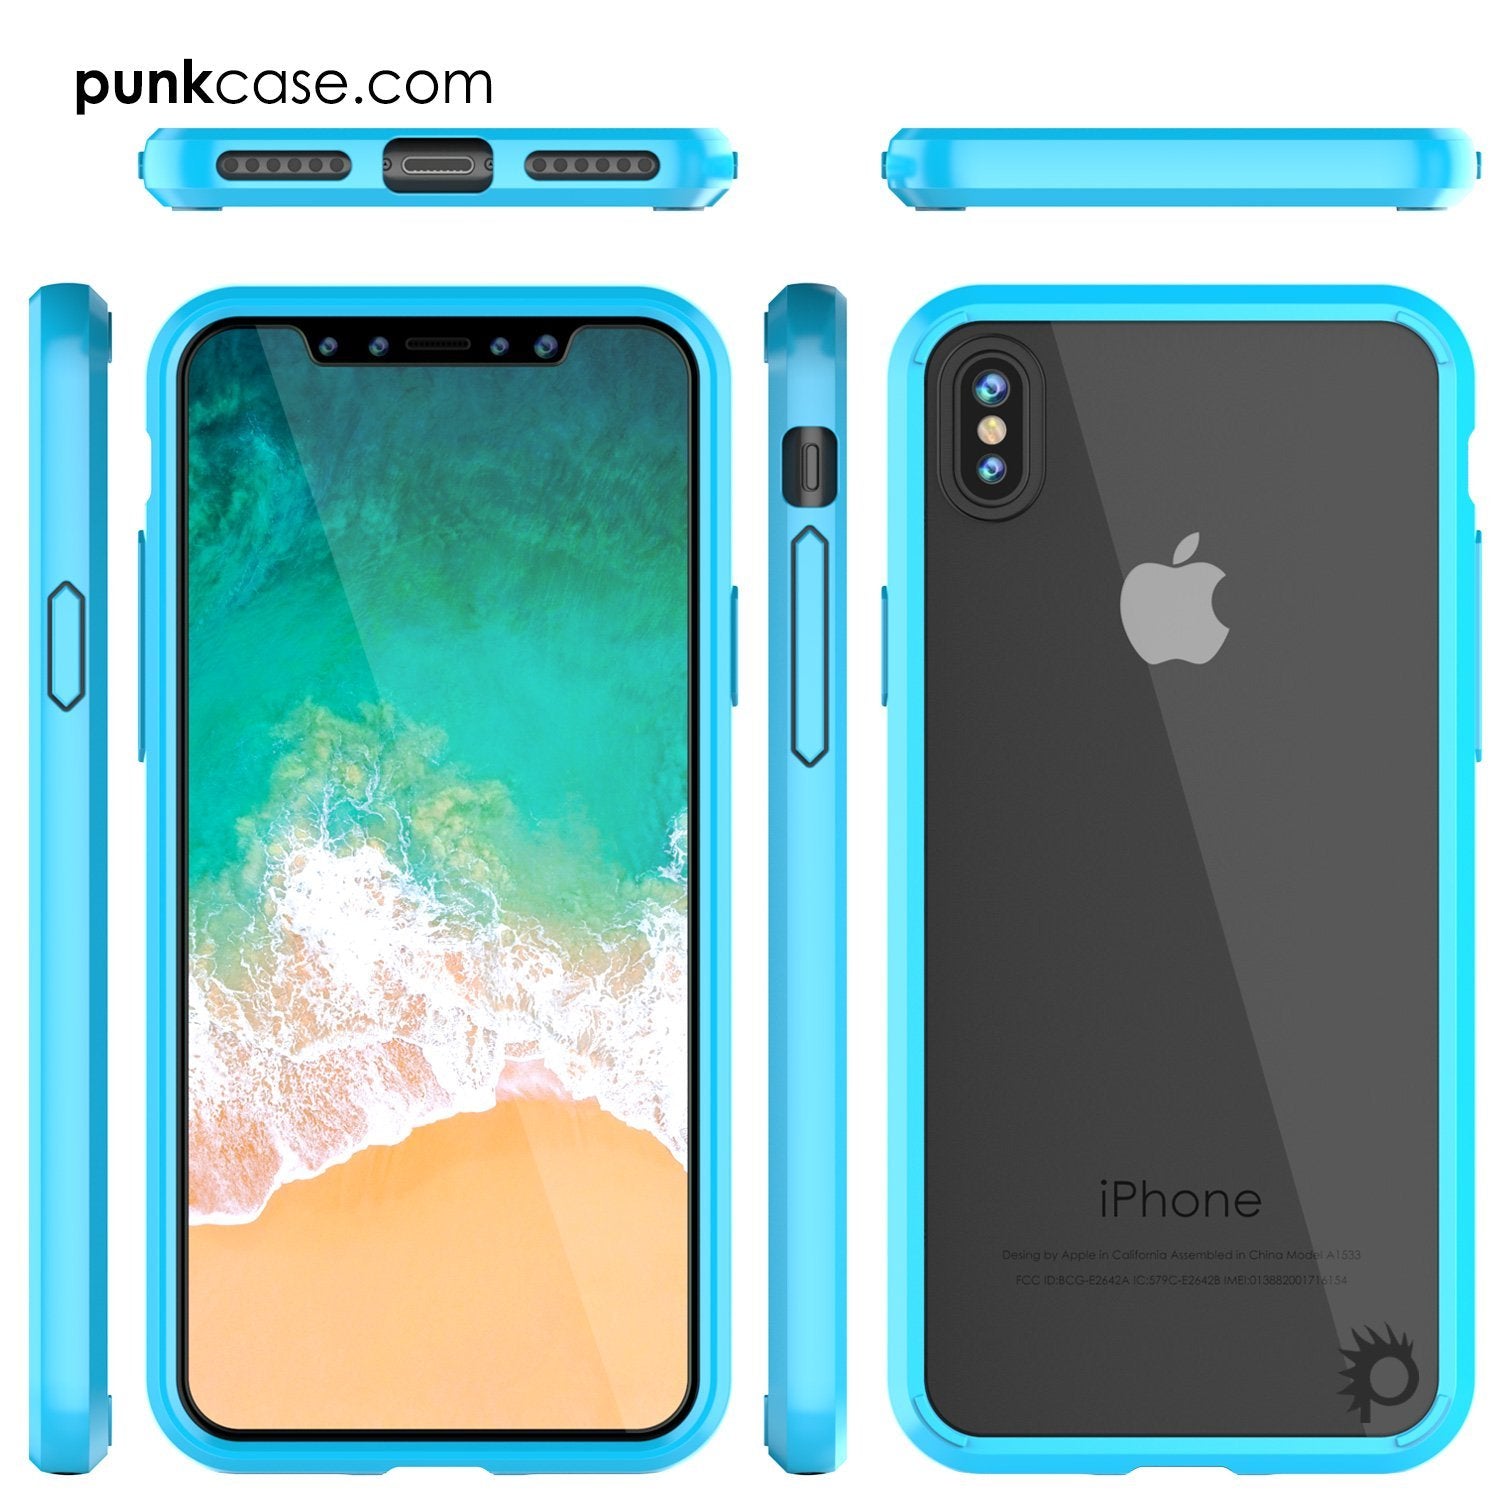 iPhone X Case, PUNKcase [LUCID 2.0 Series] [Slim Fit] Armor Cover W/Integrated Anti-Shock System & Tempered Glass Screen Protector [Light Blue]